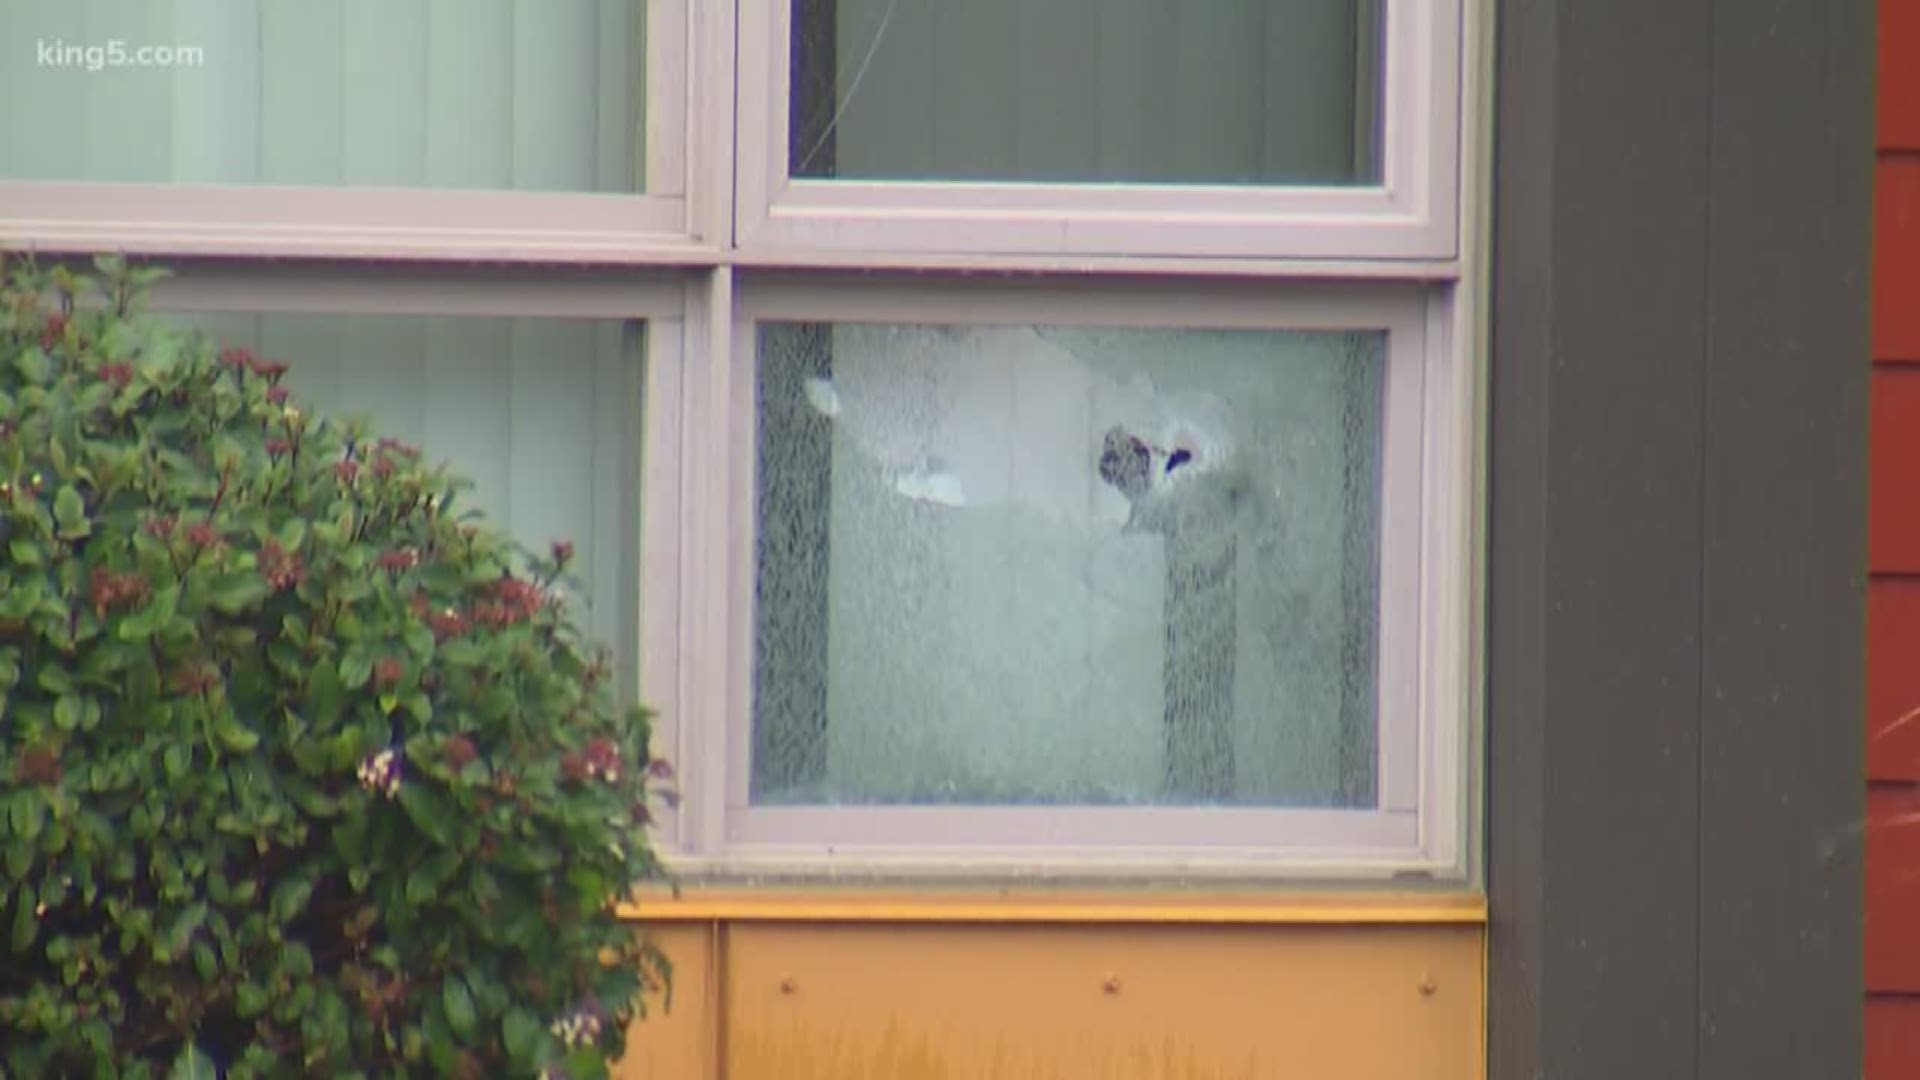 A man was killed and two officers were hurt after an overnight shooting. This began unfolding just after midnight on 14th Avenue South in Federal Way.